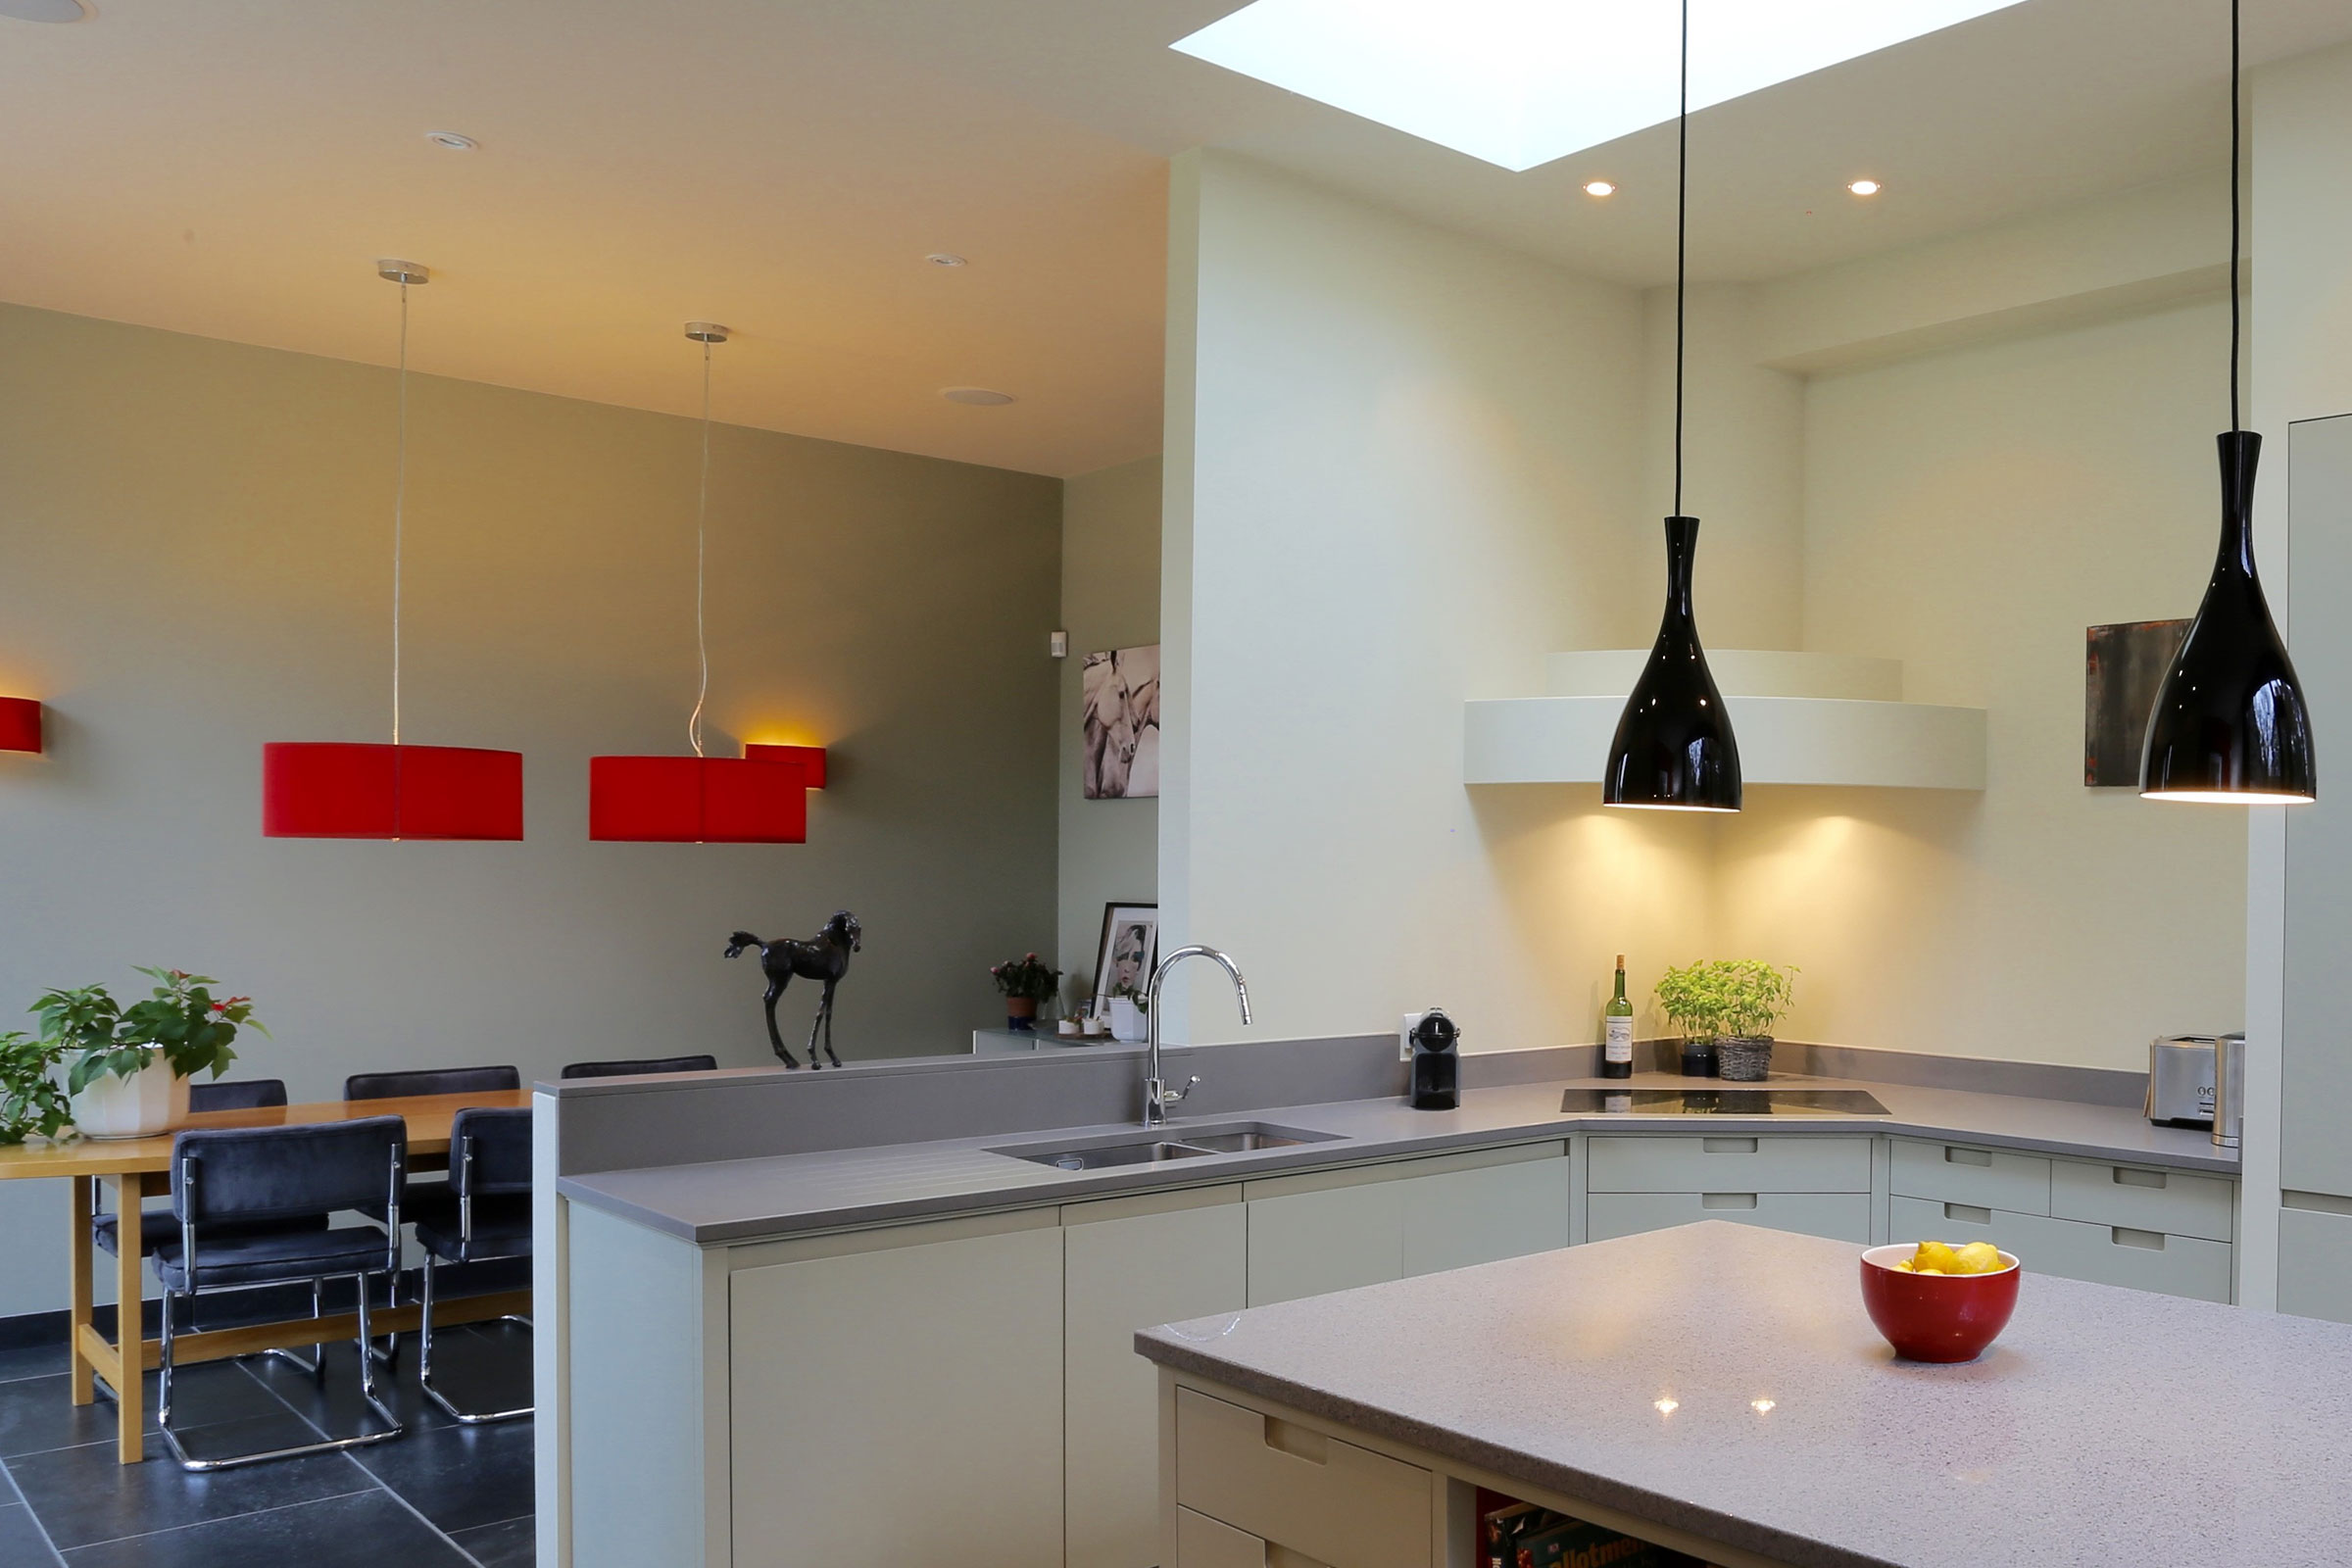 Contemporary kitchen design with undermounted sink & flush mounted hob